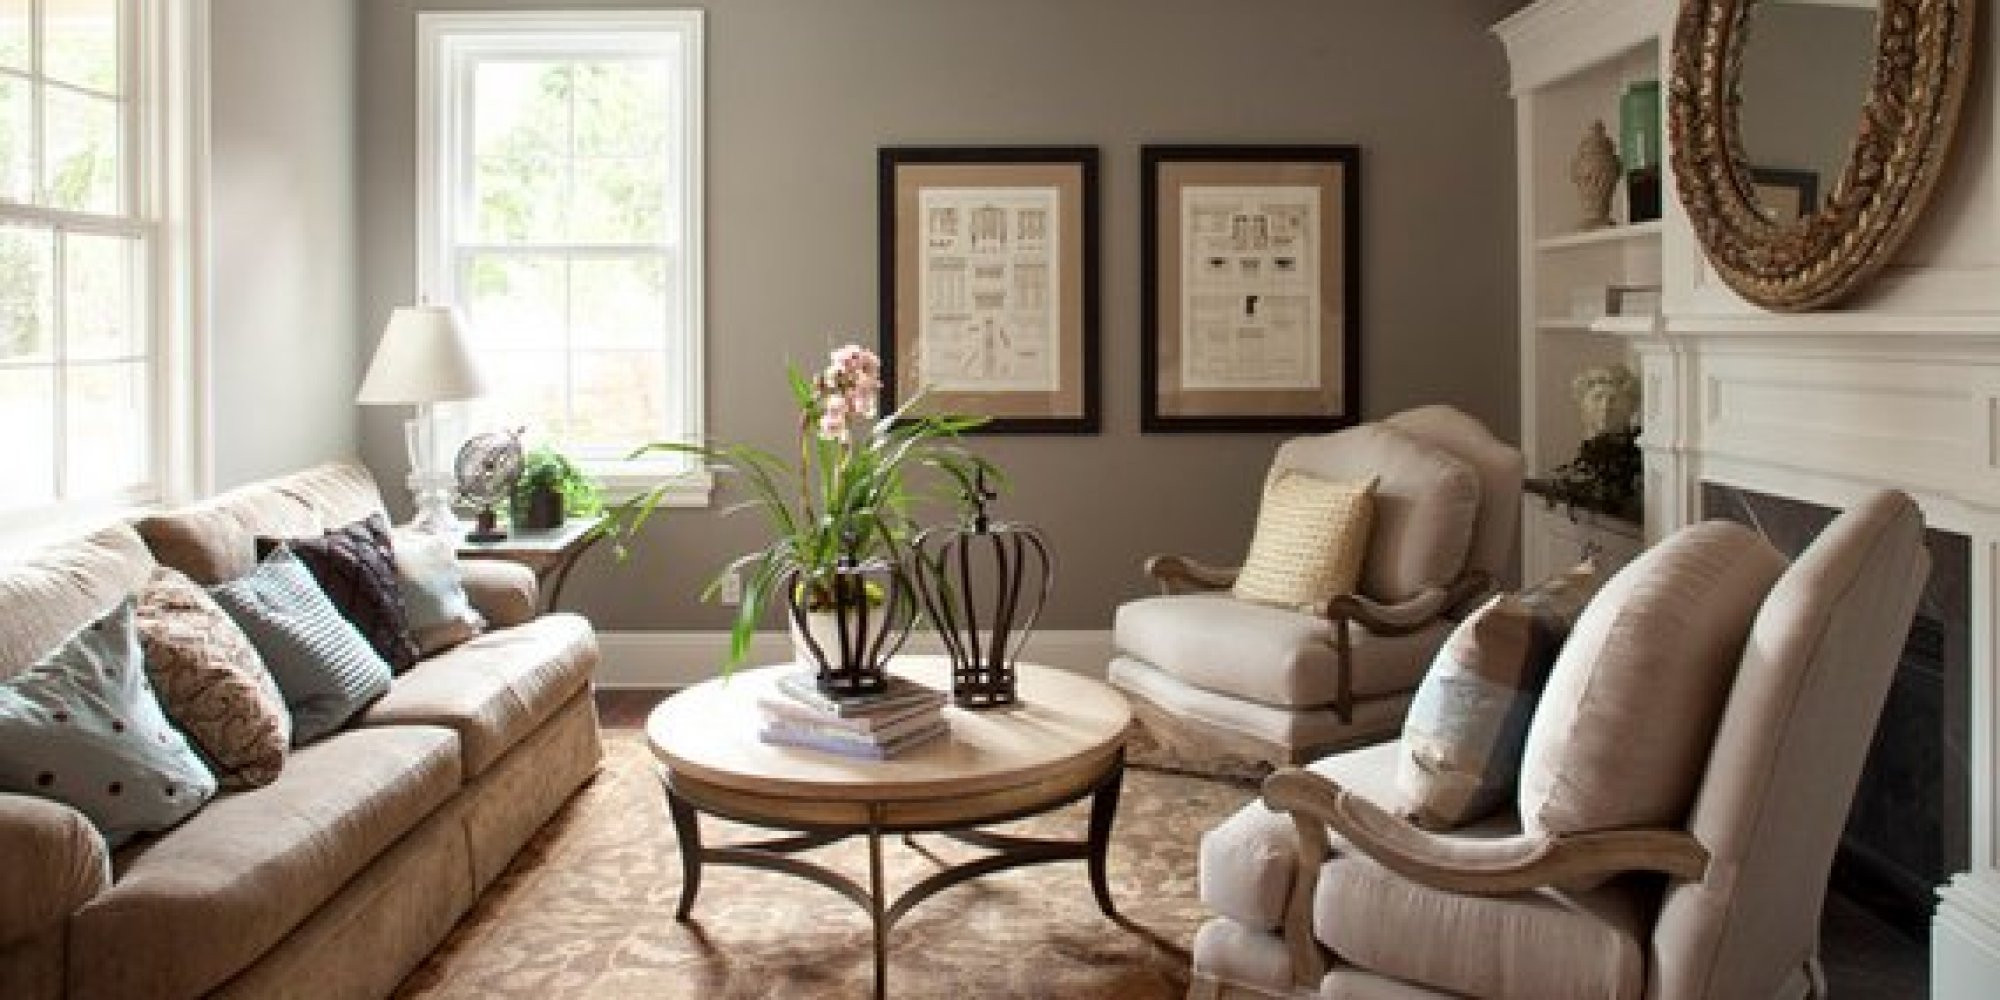 Top Living Room Paint Colors
 The 6 Best Paint Colors That Work In Any Home